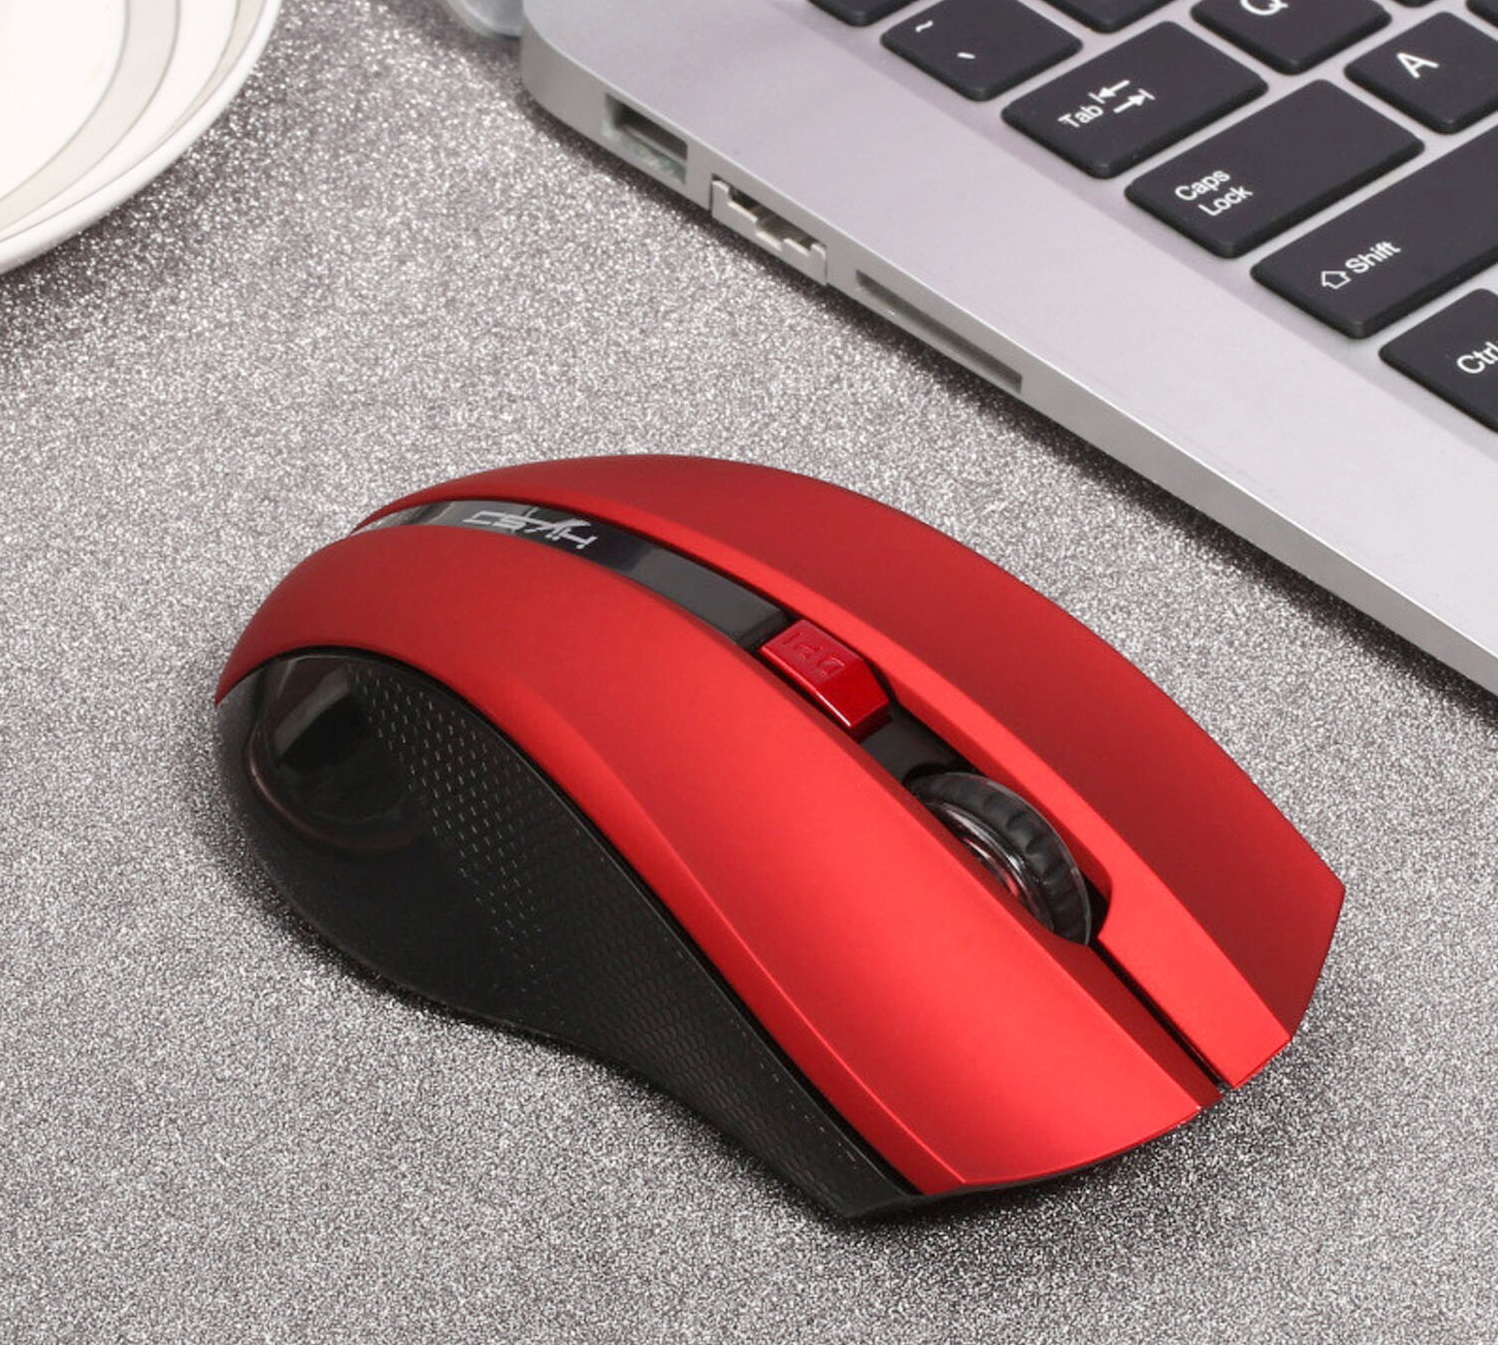 Vococal X50 - a new generation mouse